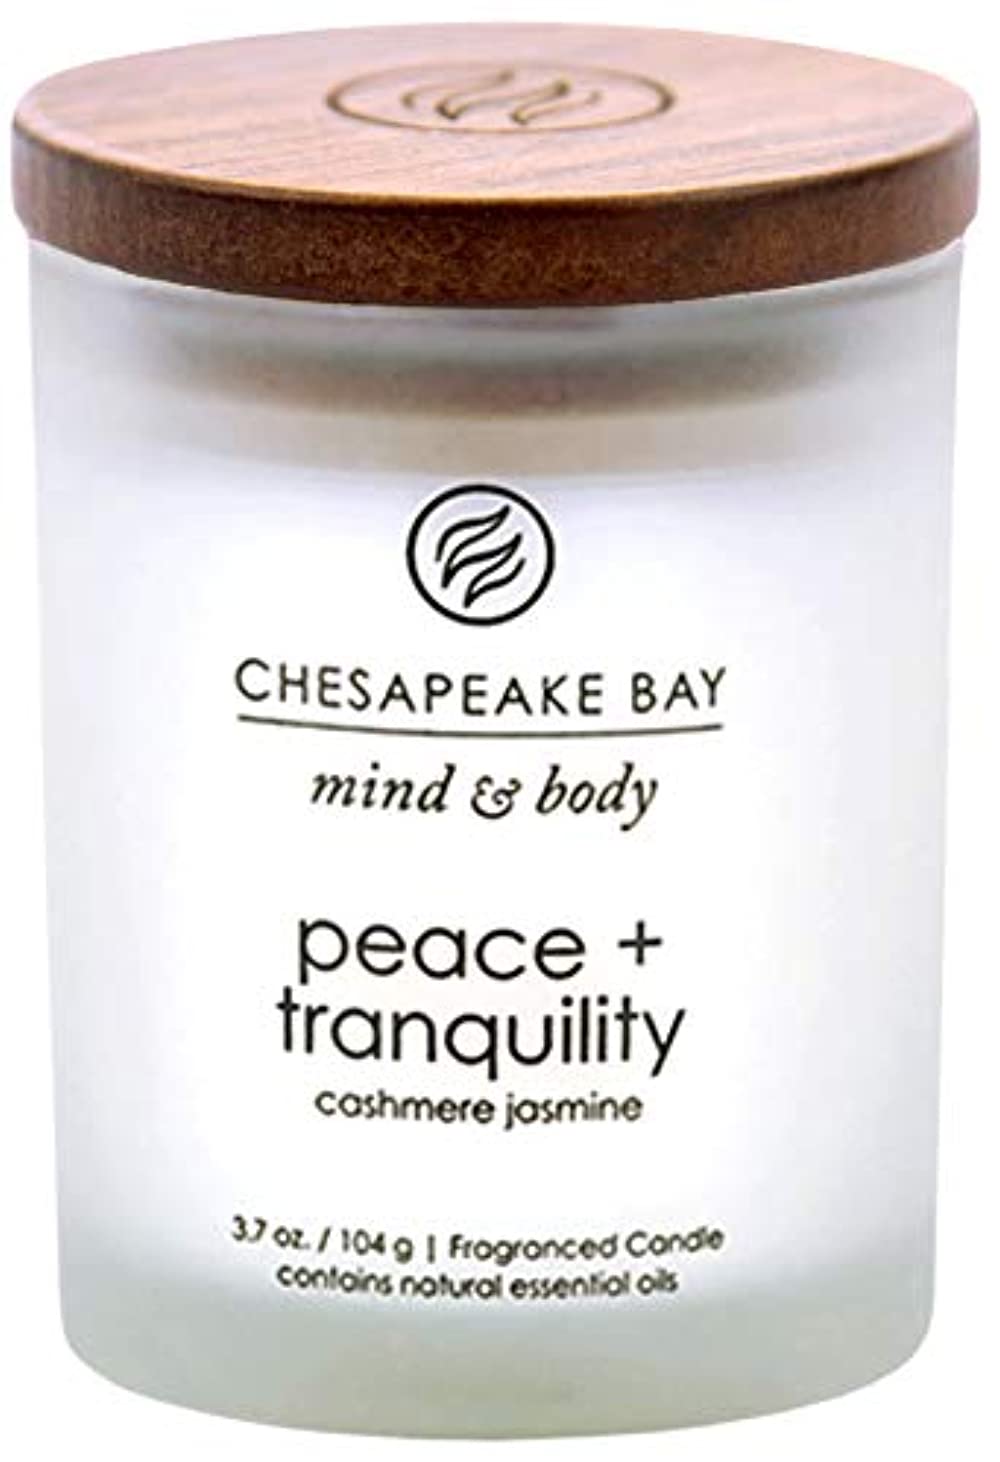 Chesapeake Bay Candle Peace + Tranquility, Balance + Harmony, Serenity + Calm Scented Candle Gift Set, Small Jar (3-Pack), Assorted - image 3 of 3